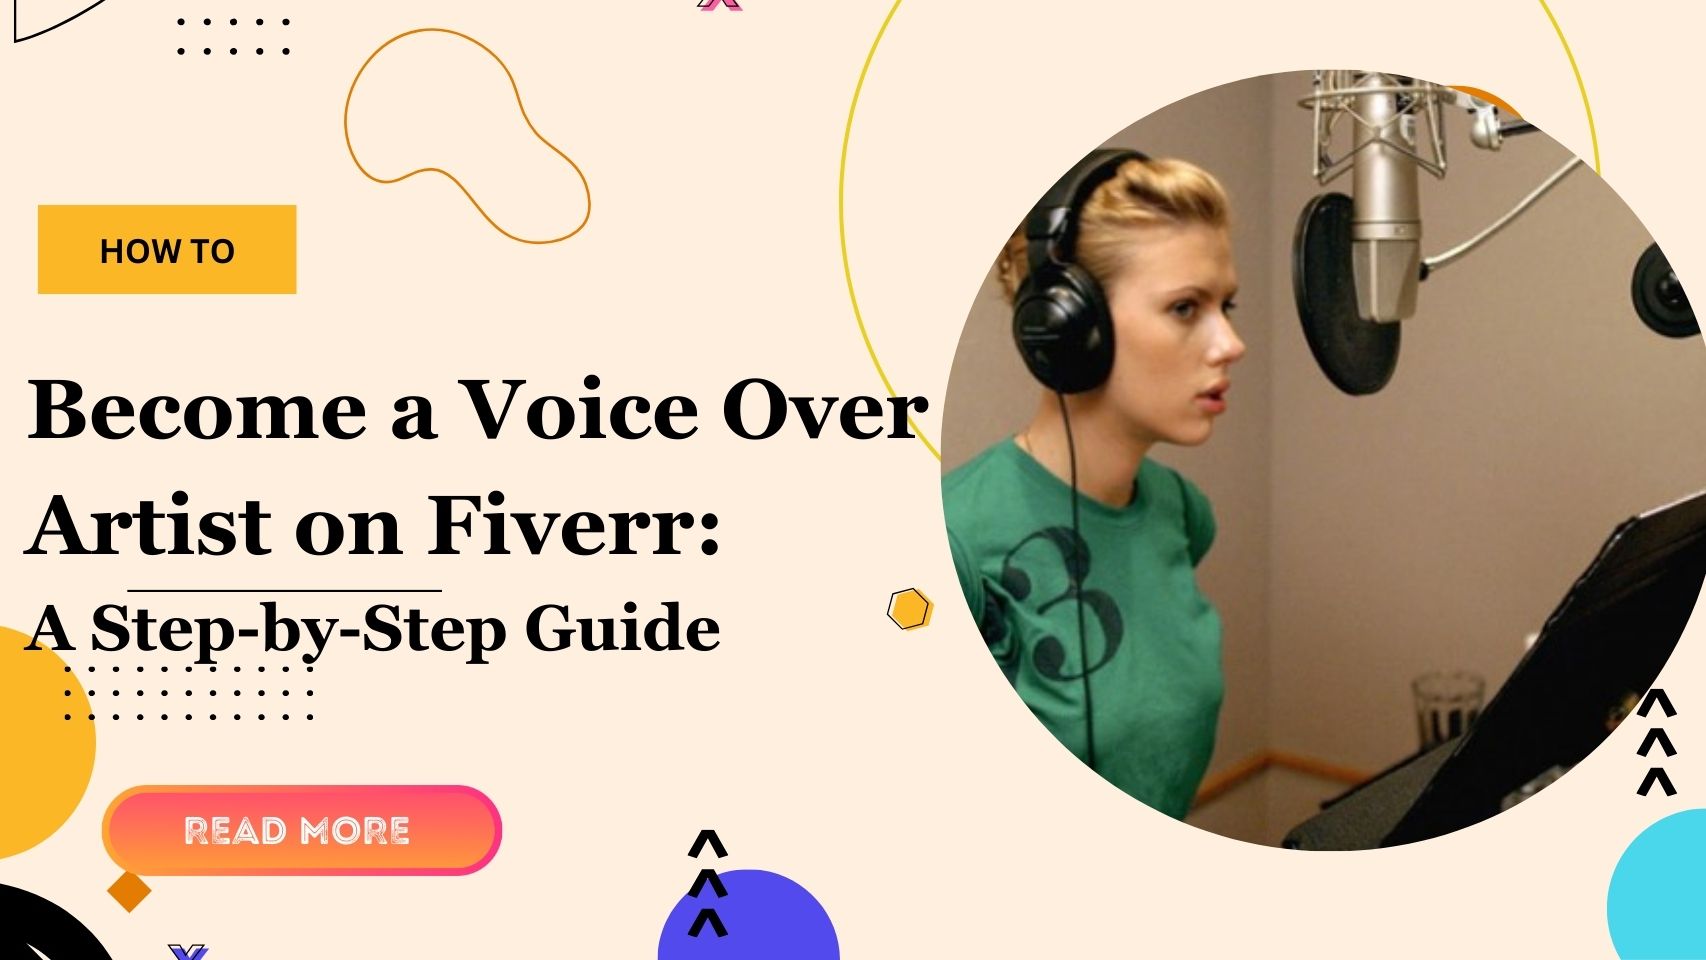 How to Become a Voice Over Artist on Fiverr: A Step-by-Step Guide